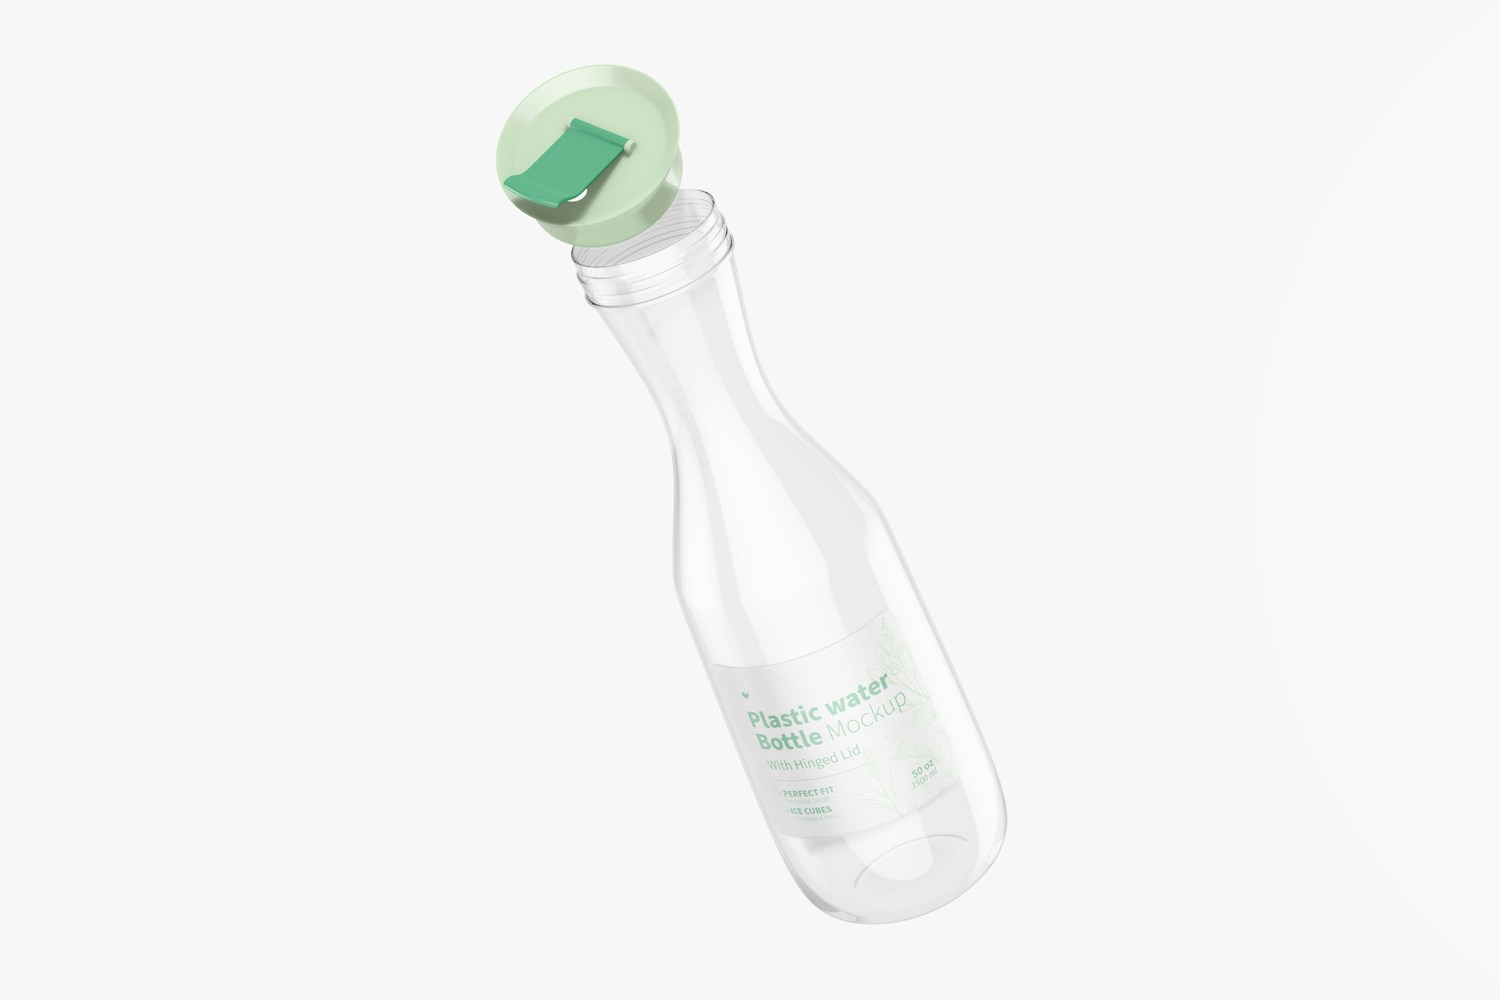 Plastic Water Bottle with Hinged Lid Mockup, Opened